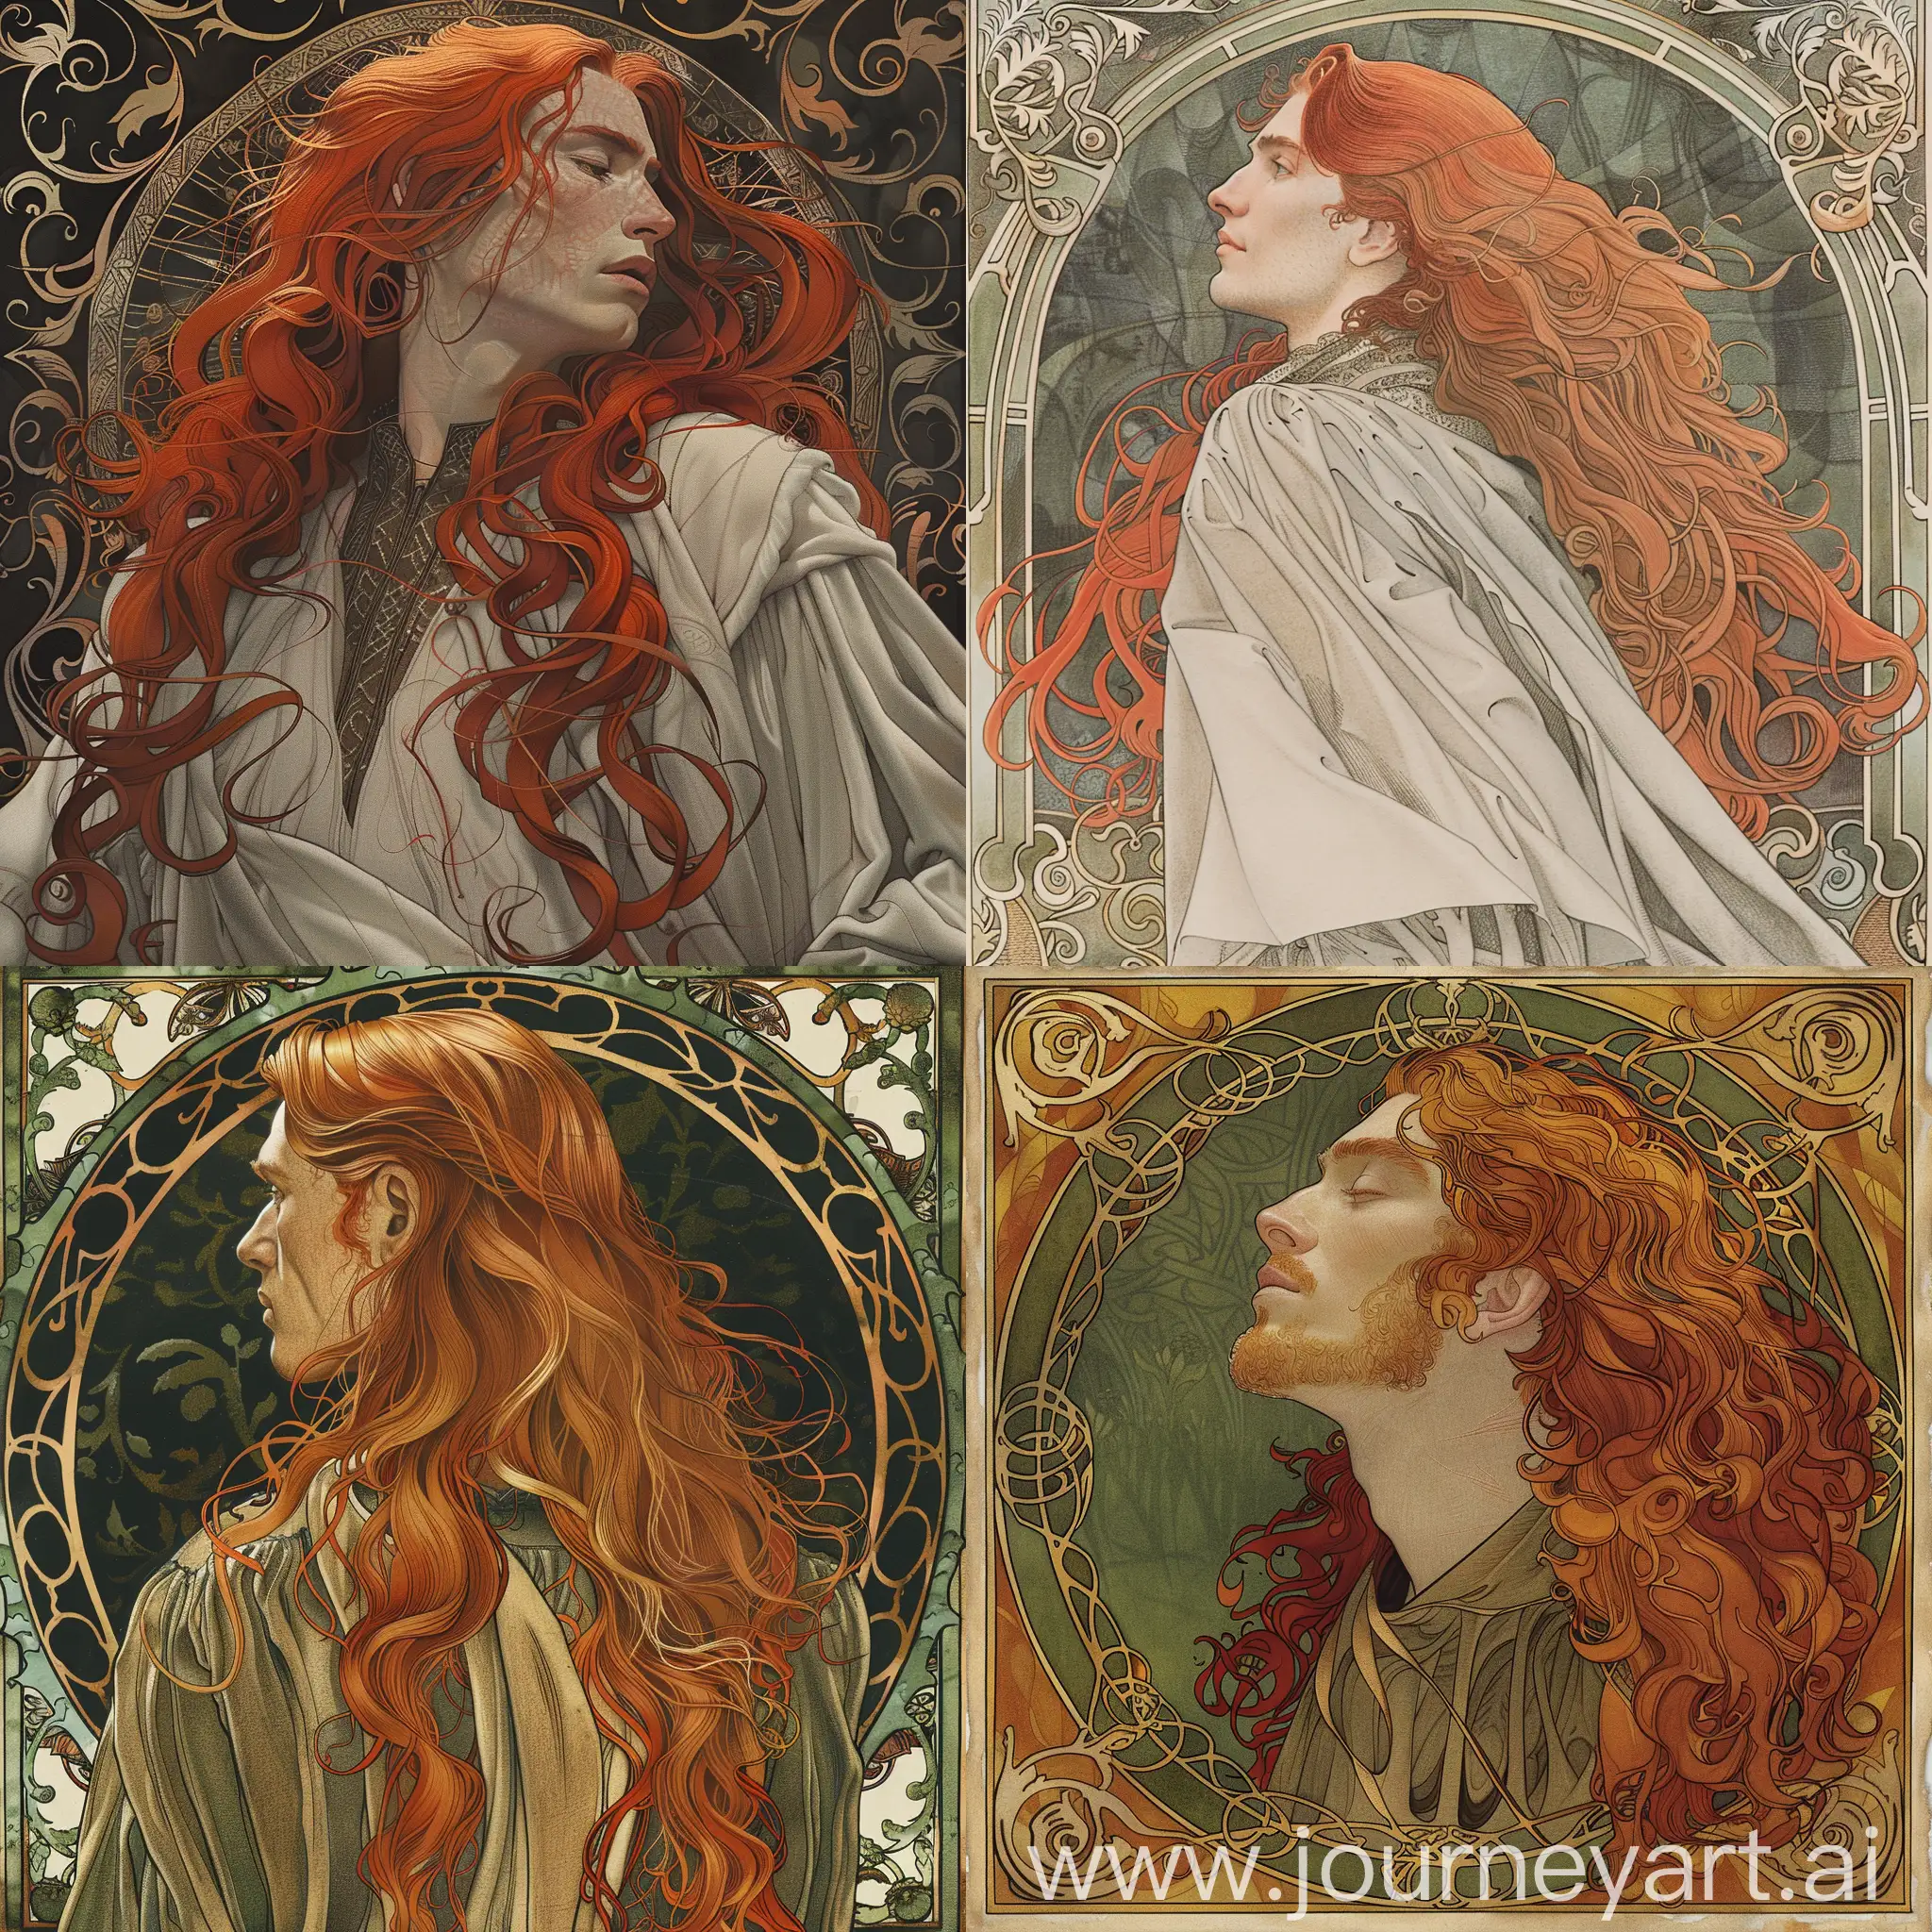 Illustration-of-a-Man-in-Mantle-with-Long-Red-Hair-Art-Nouveau-Style